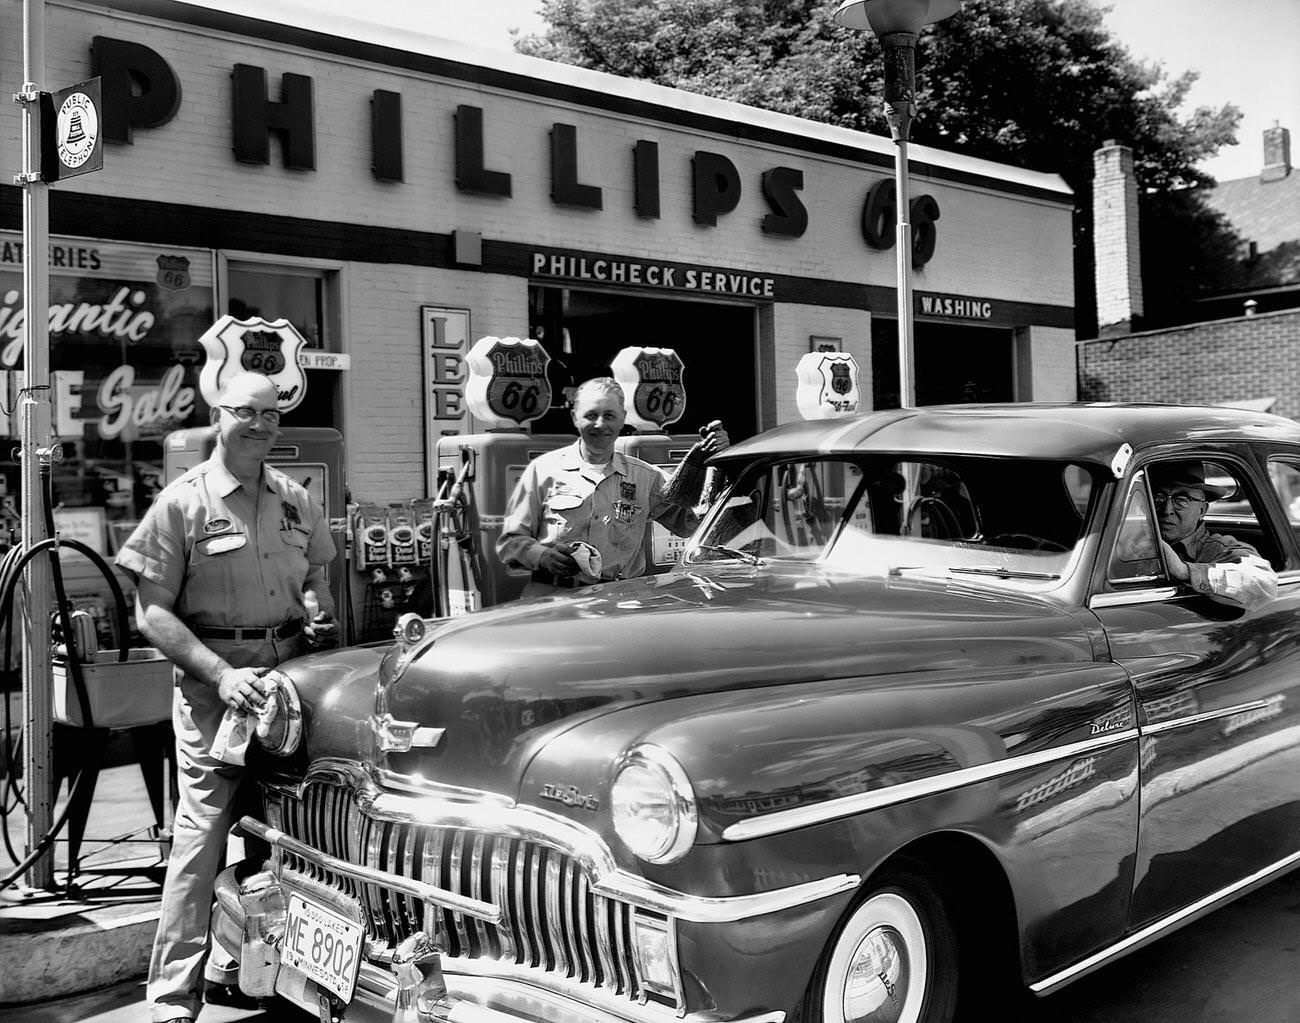 Attendants and Motorist at Phillips Service Station.